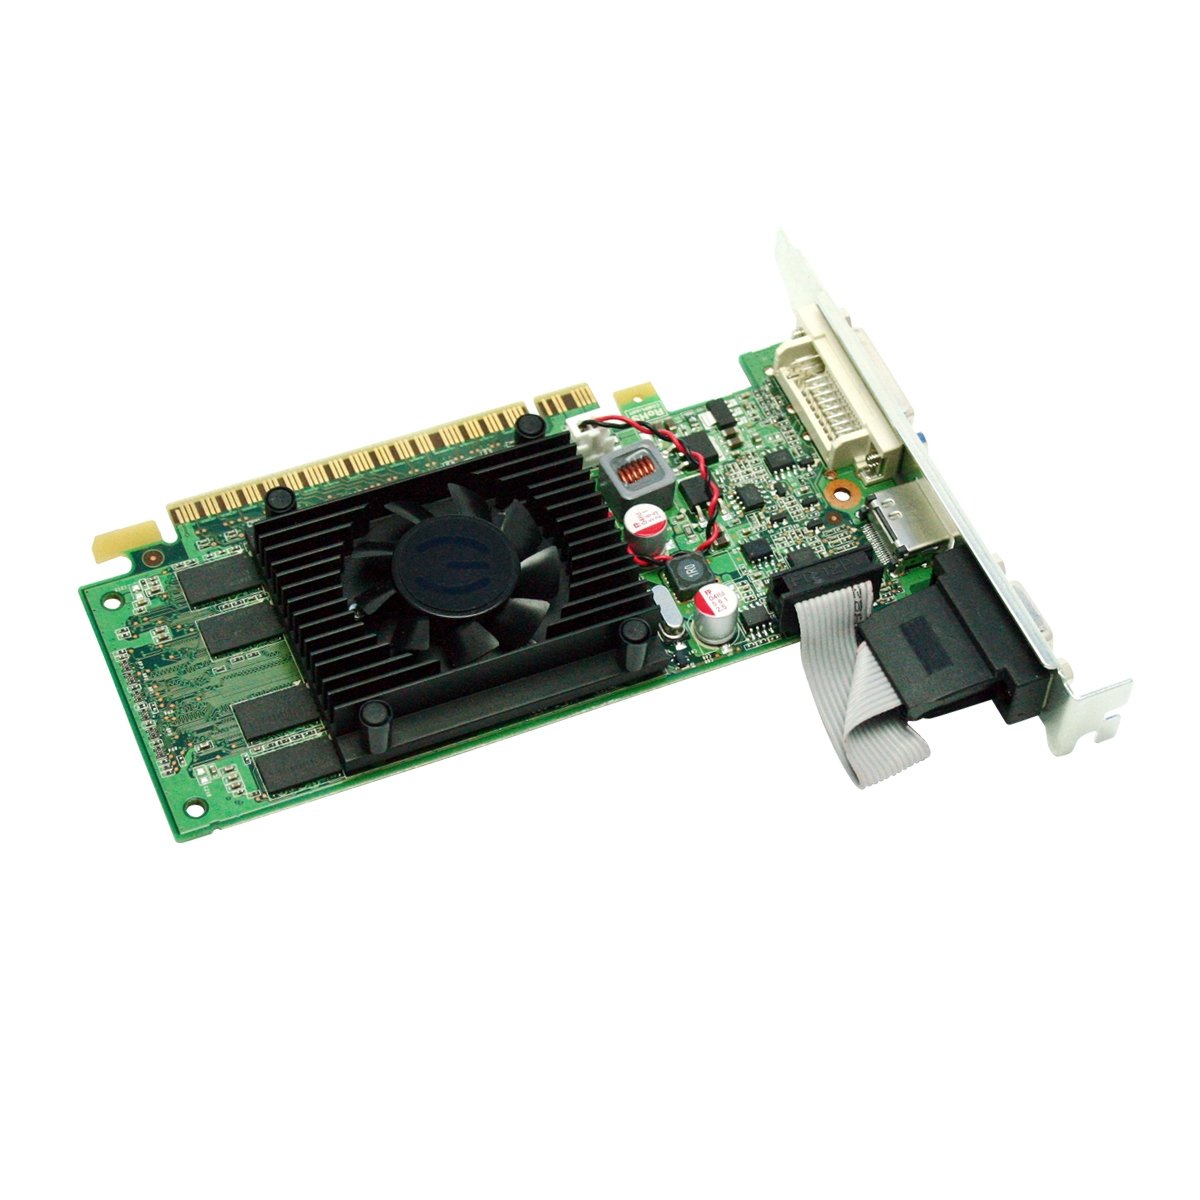 64mb video card with directx 9 compatible drivers free download pc